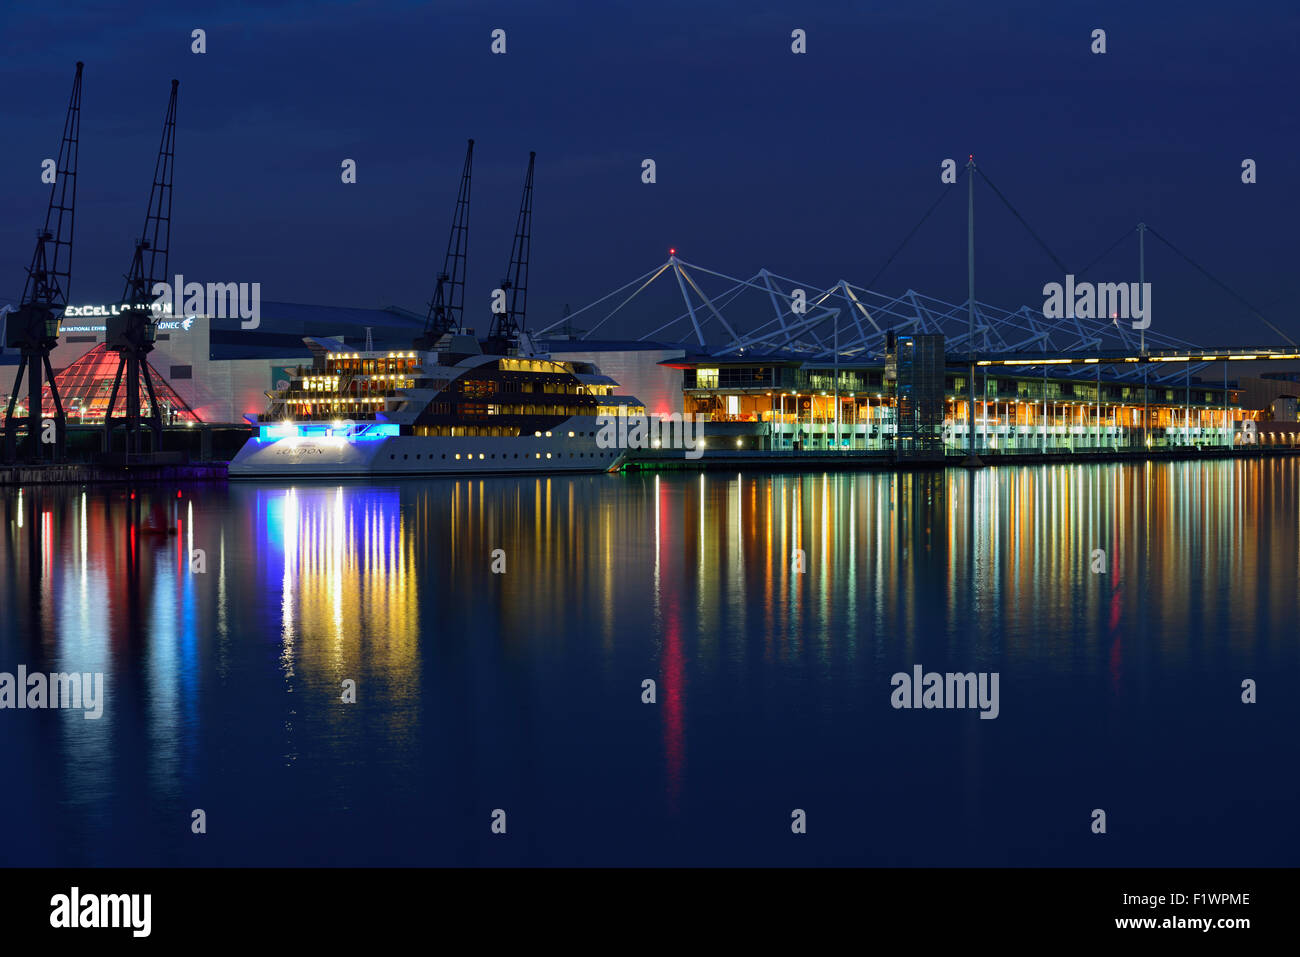 ExCeL exhibition and conference centre and Sunborn yacht hotel, Royal Victoria Dock, London Borough of Newham, London E16, United Kingdom Stock Photo